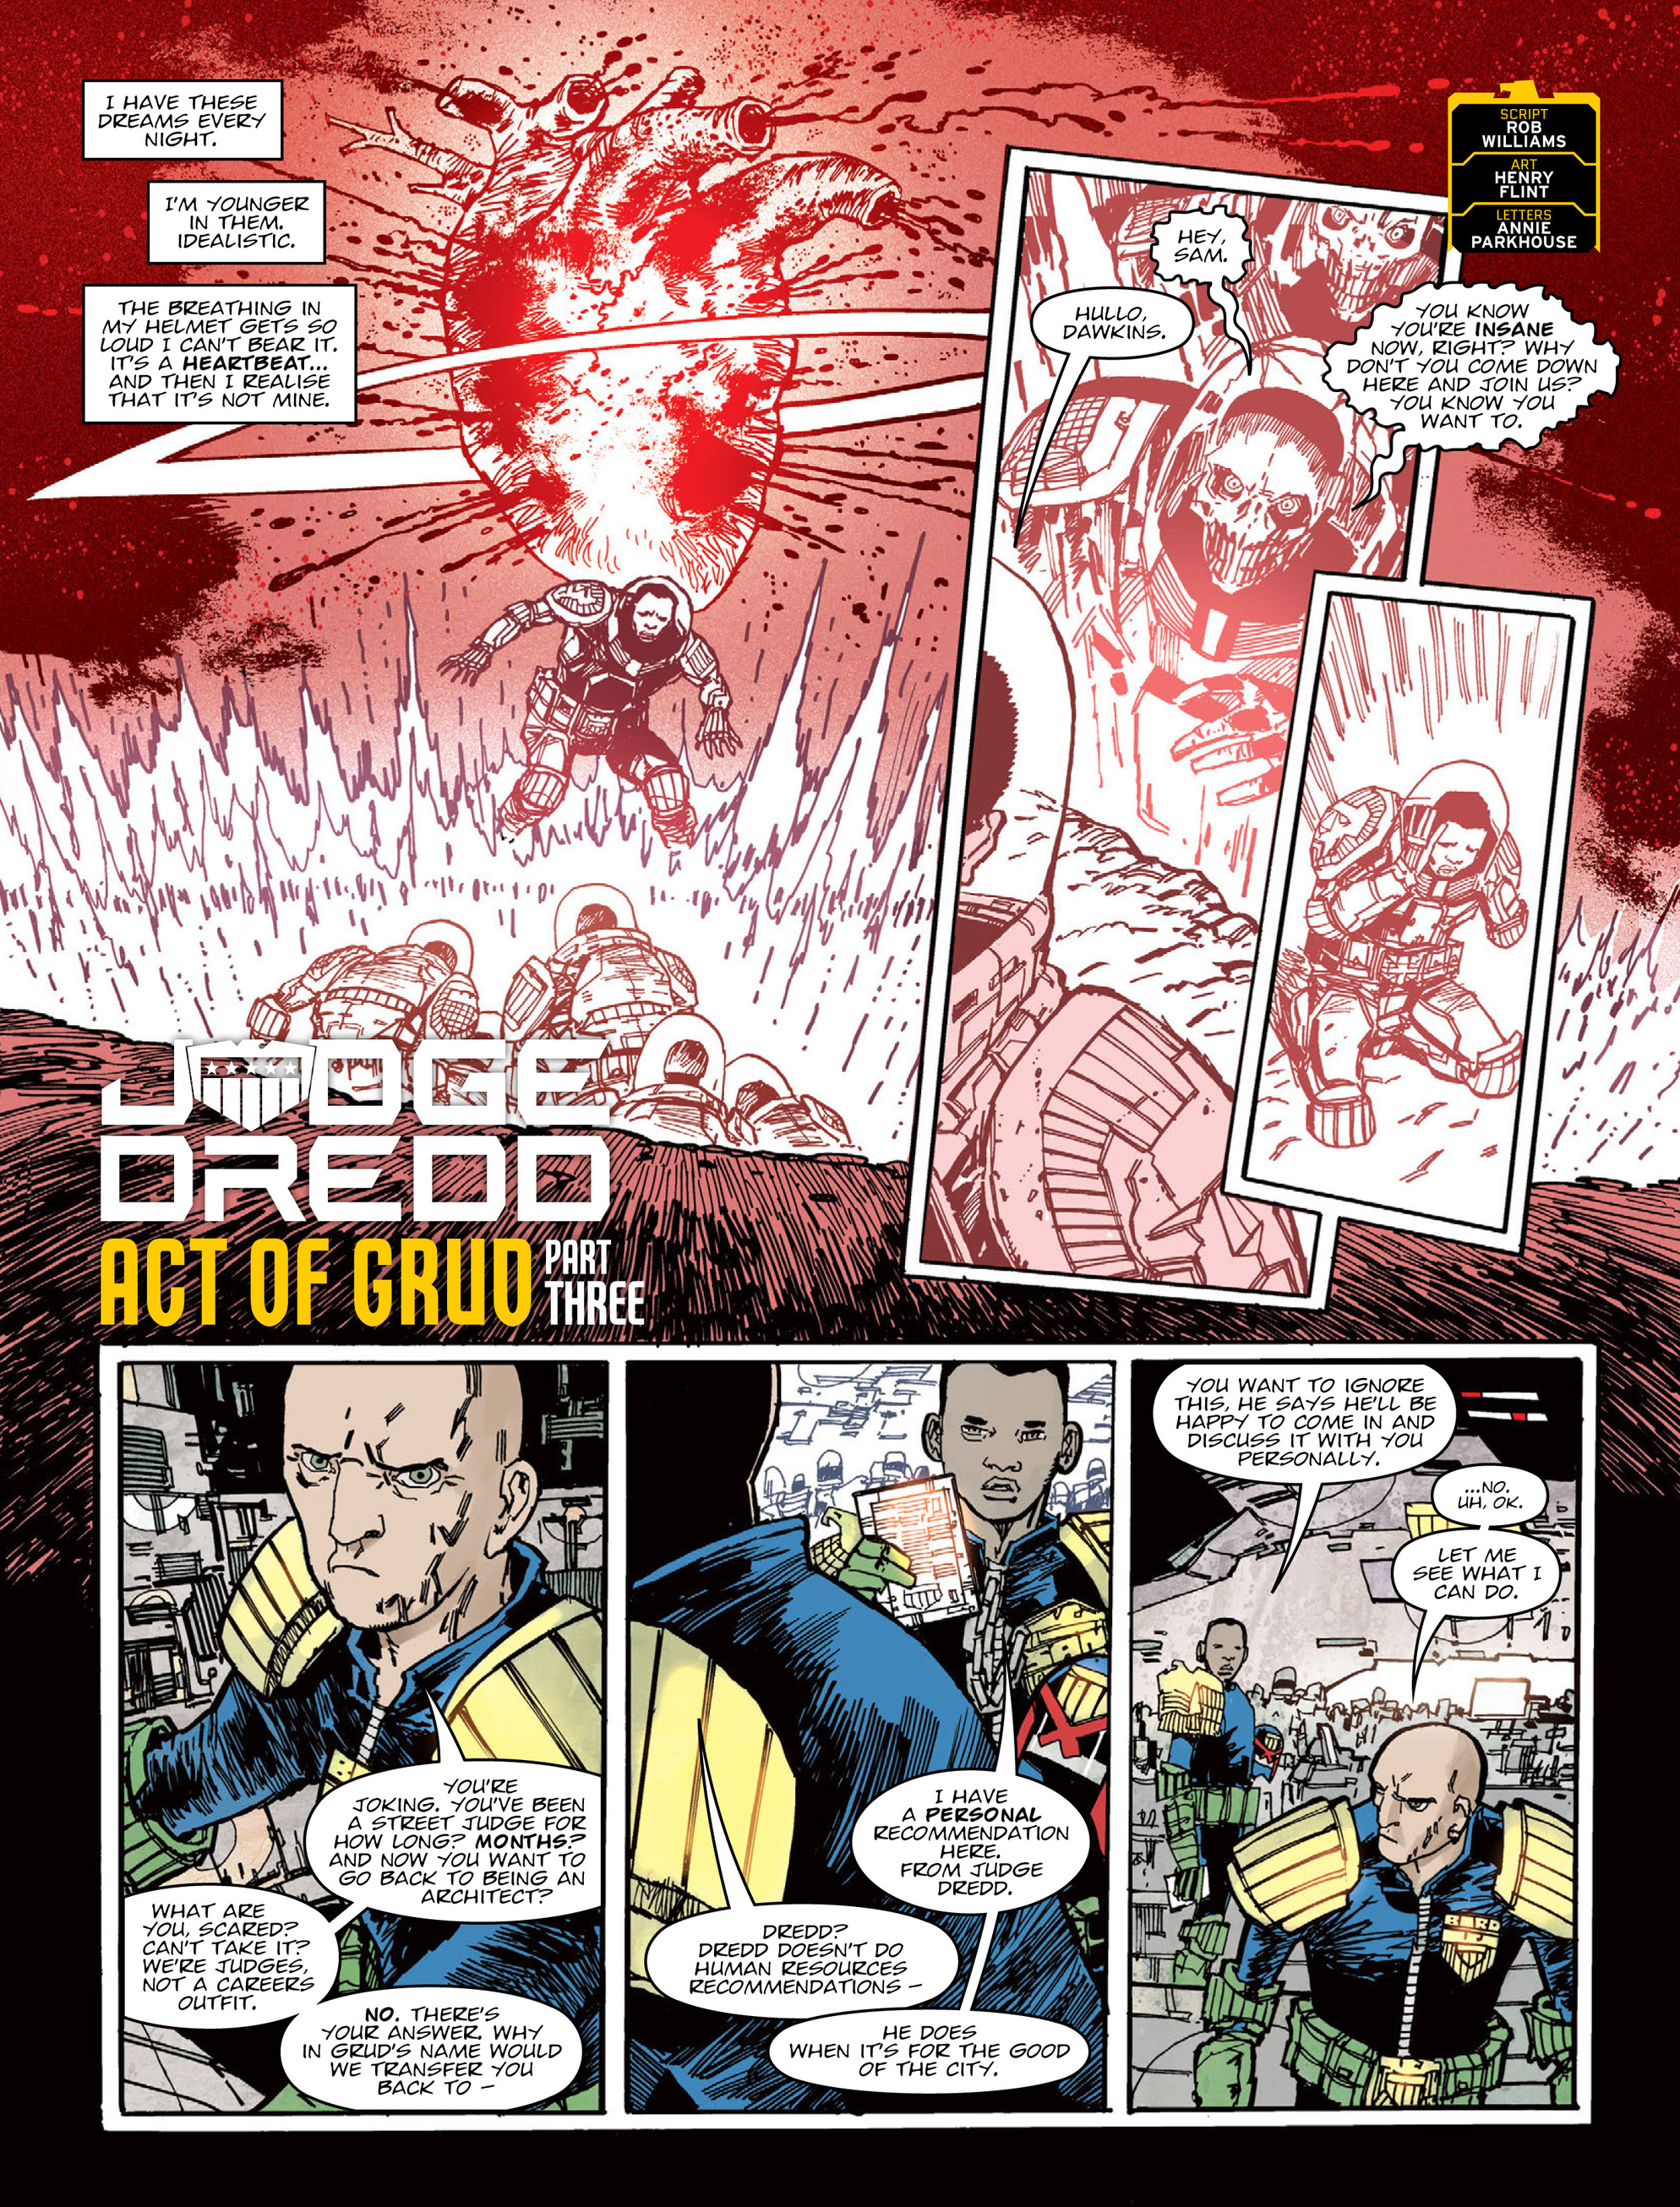 2000 AD: Chapter 2006 - Page 3